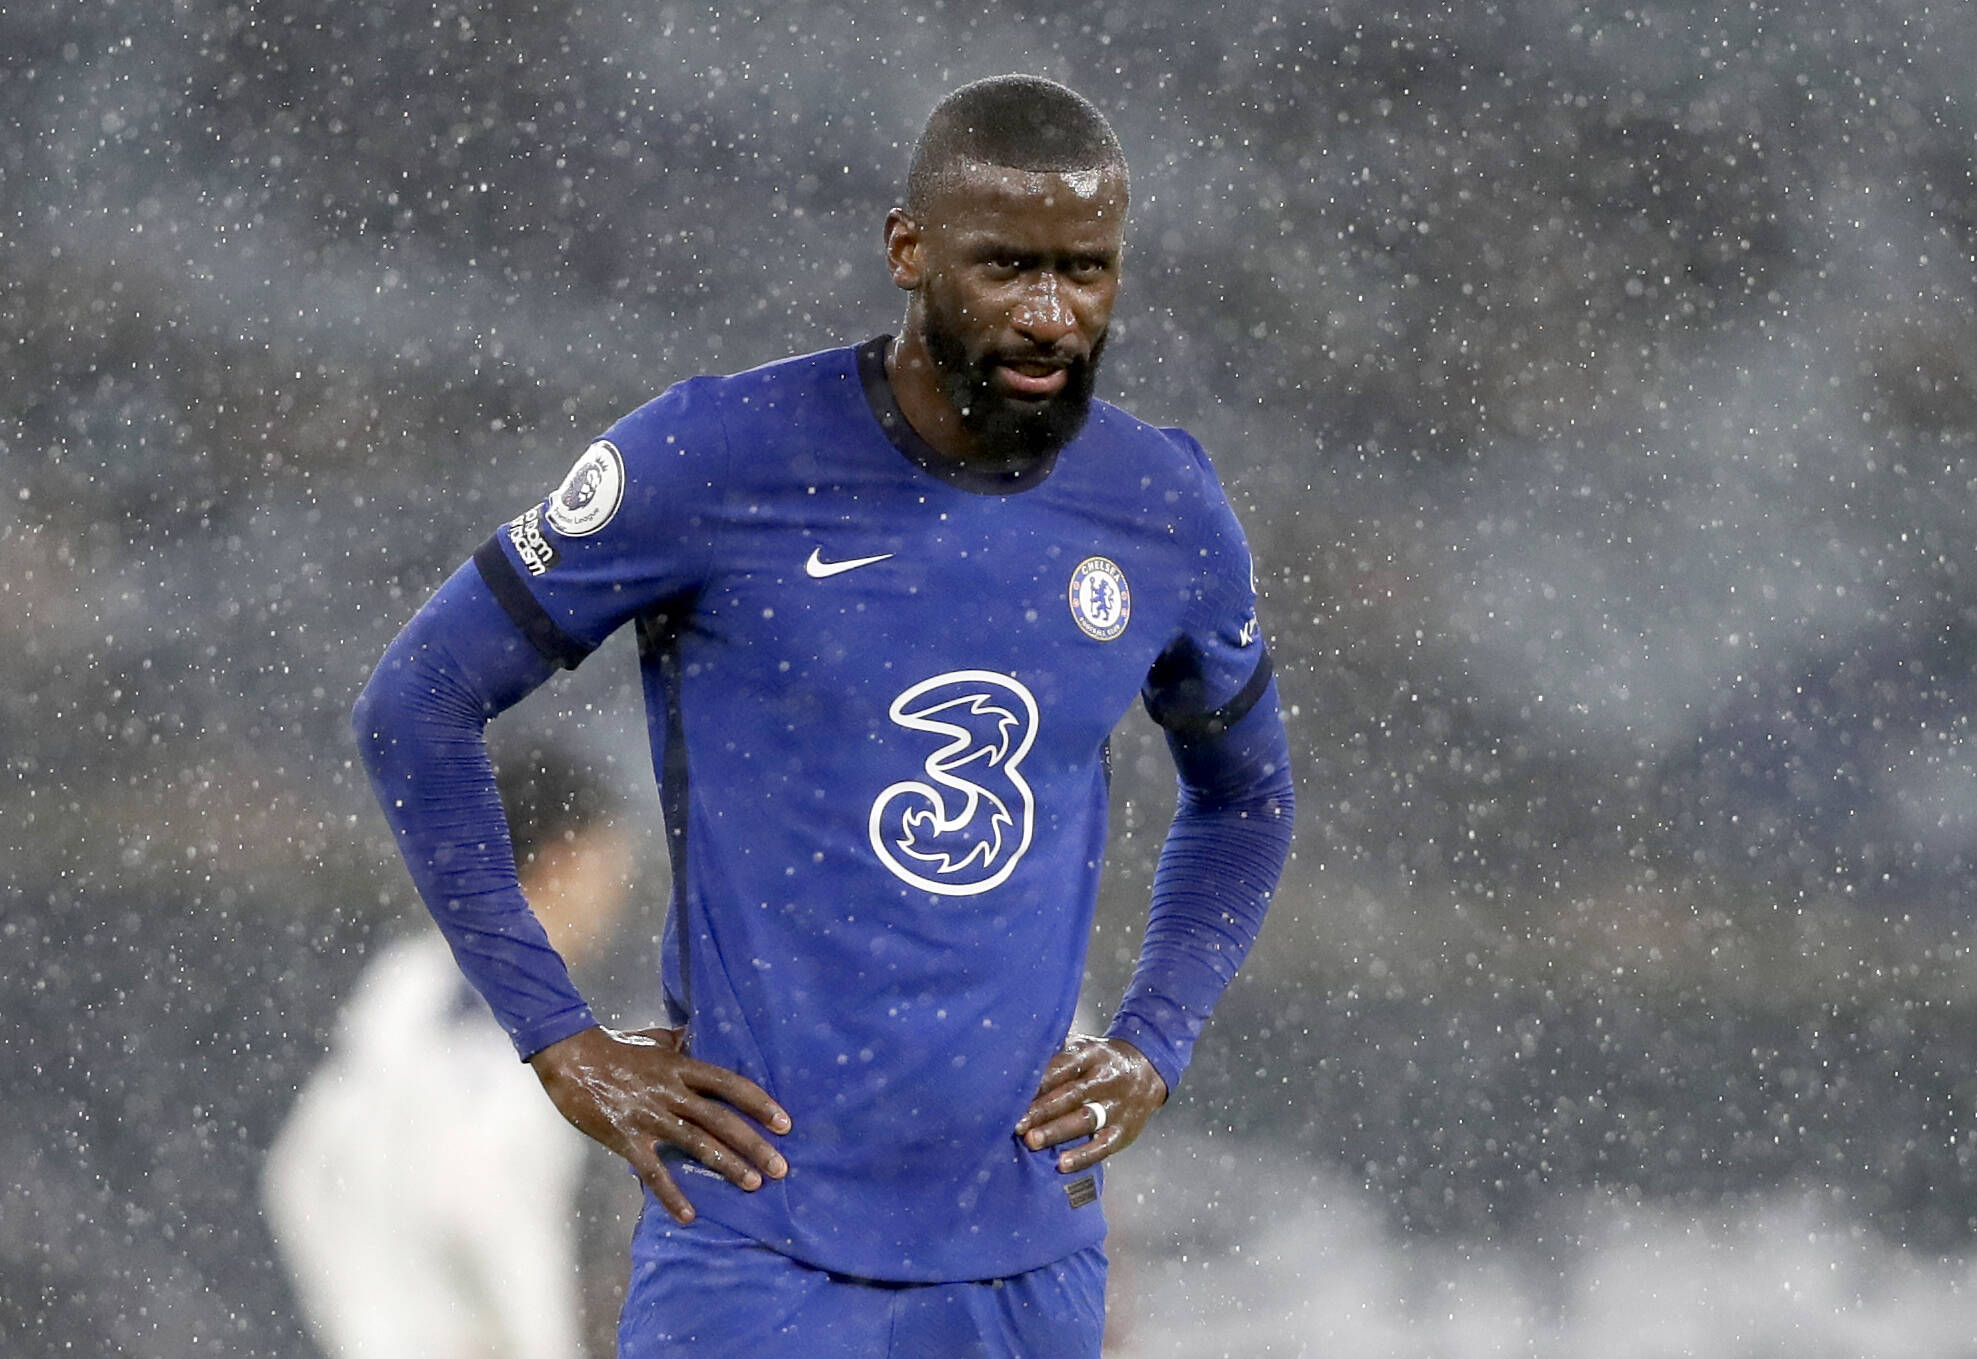 Chelsea need to get Antonio Rudiger signed up quickly, proclaims Jamie Redknapp